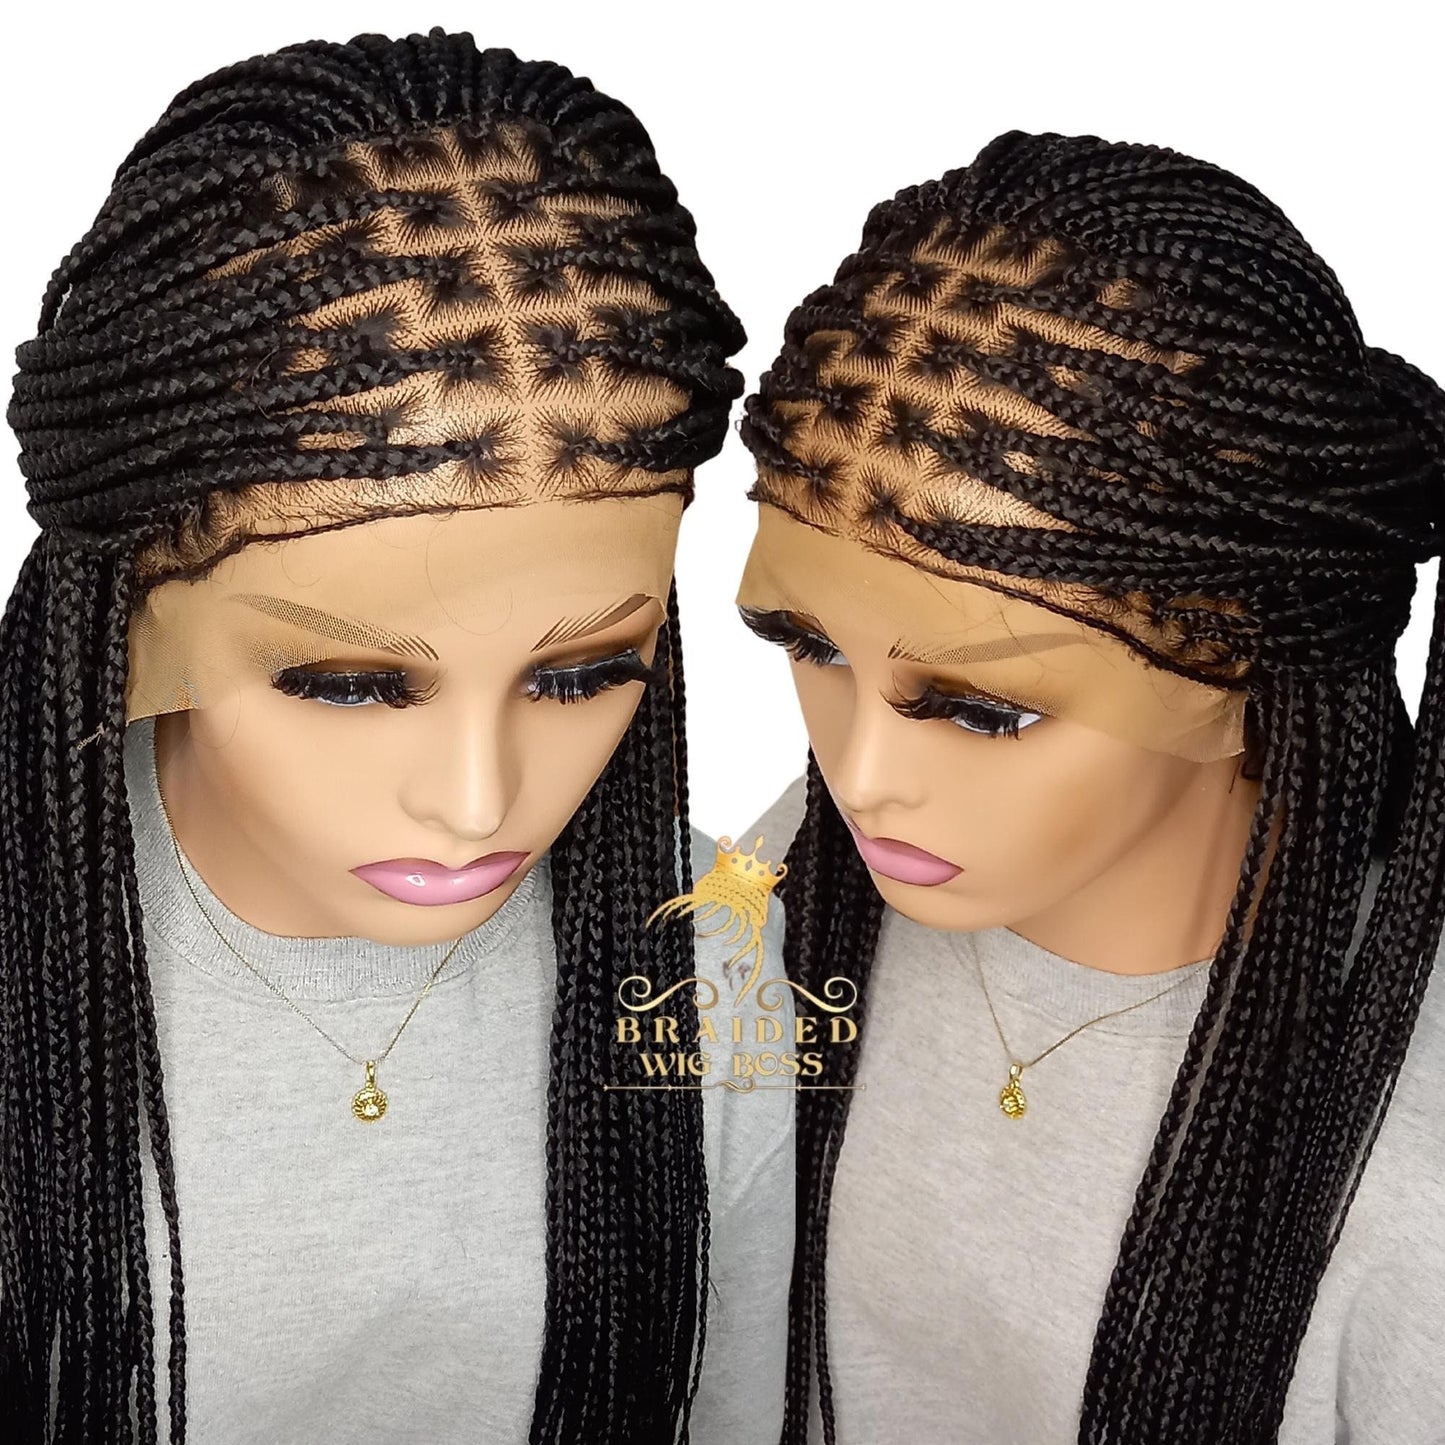 Knotless braids Long Braids Wig Synthetic Braided Wig For Black